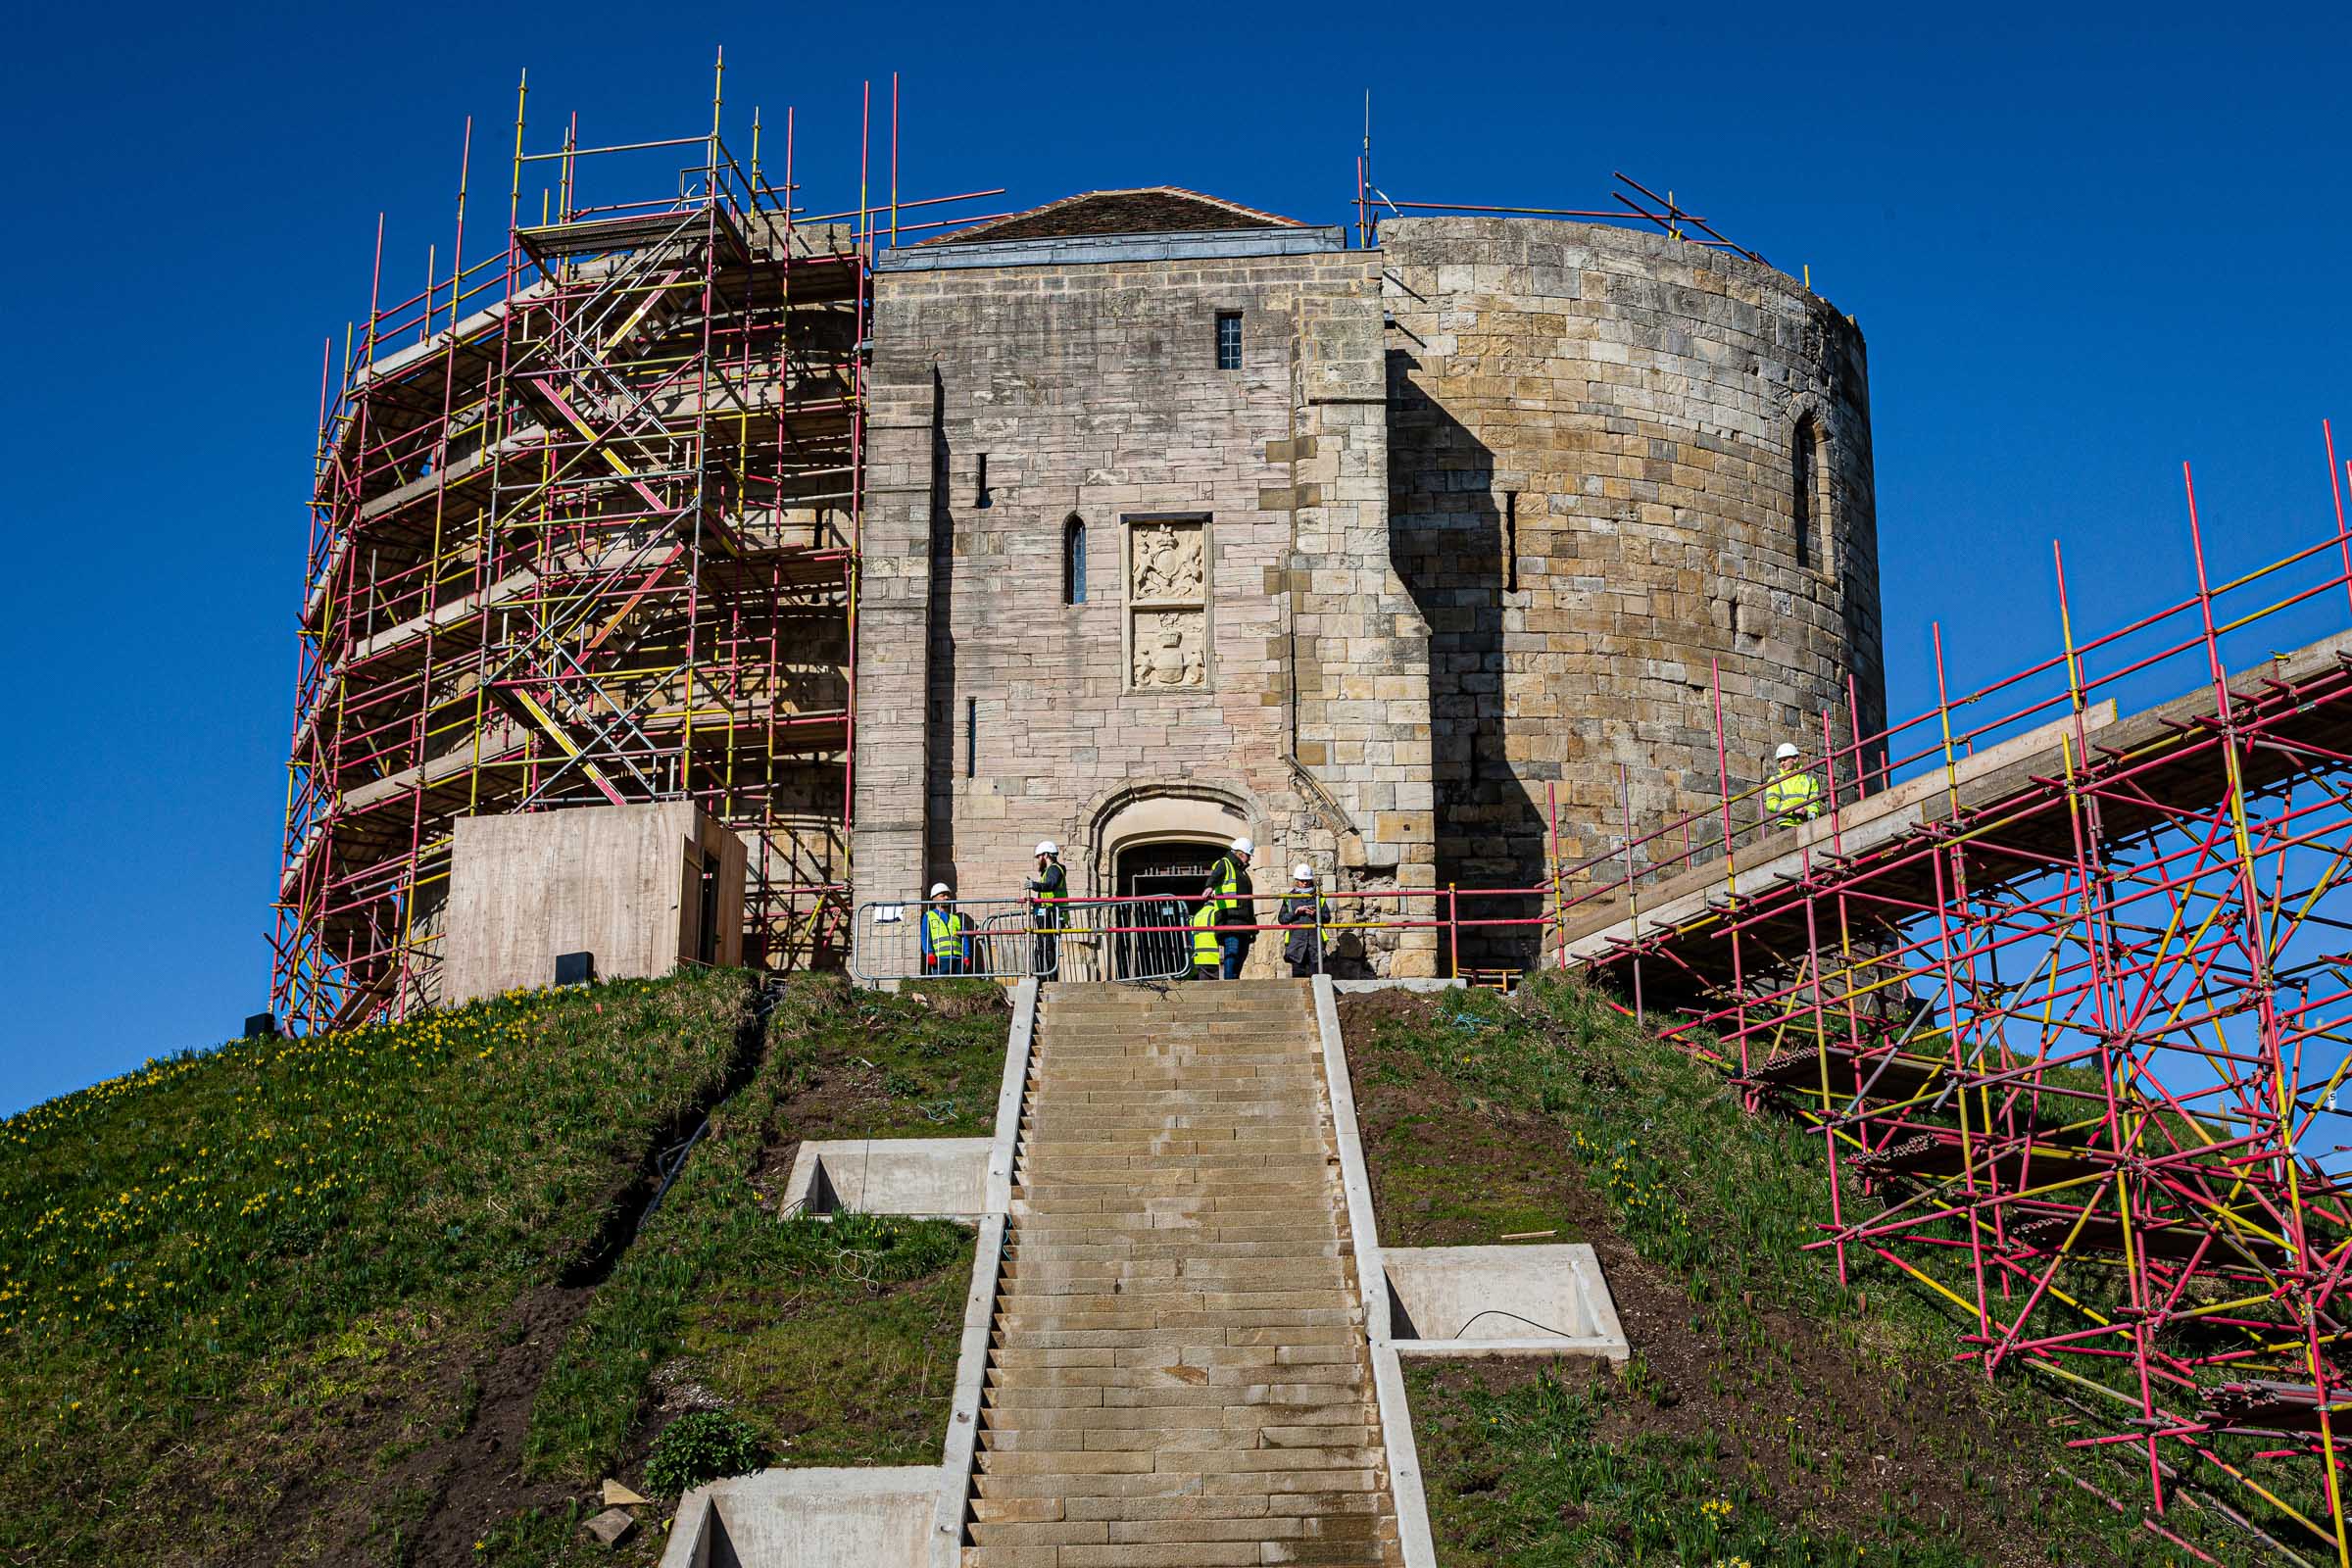 Looking to the Future, Clifford's Tower, Renewal and Hope, Roger Poyser